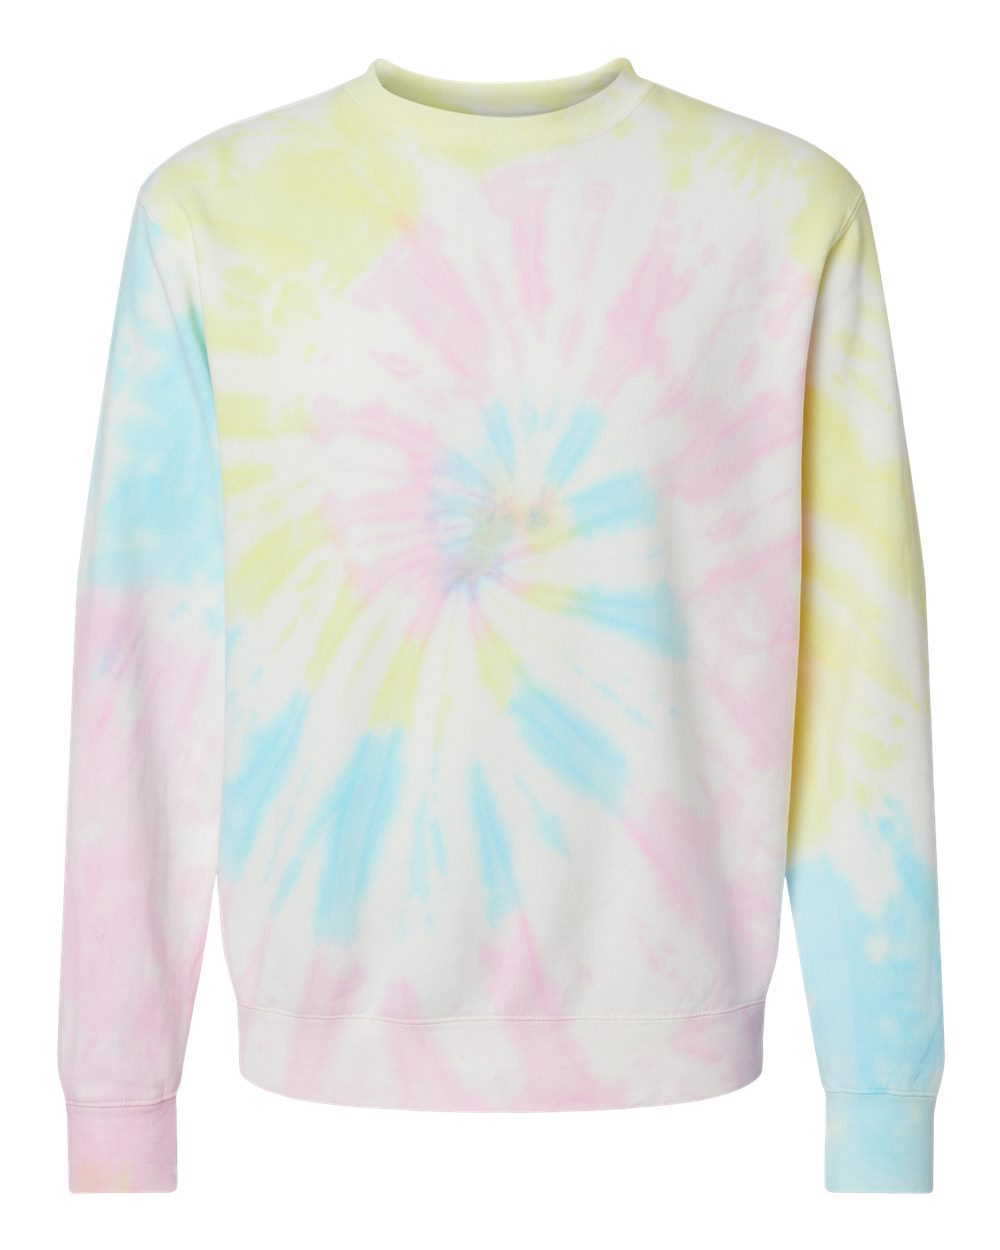 Independent Trading Co. - Midweight Tie-Dyed Crewneck Sweatshirt - PRM3500TD